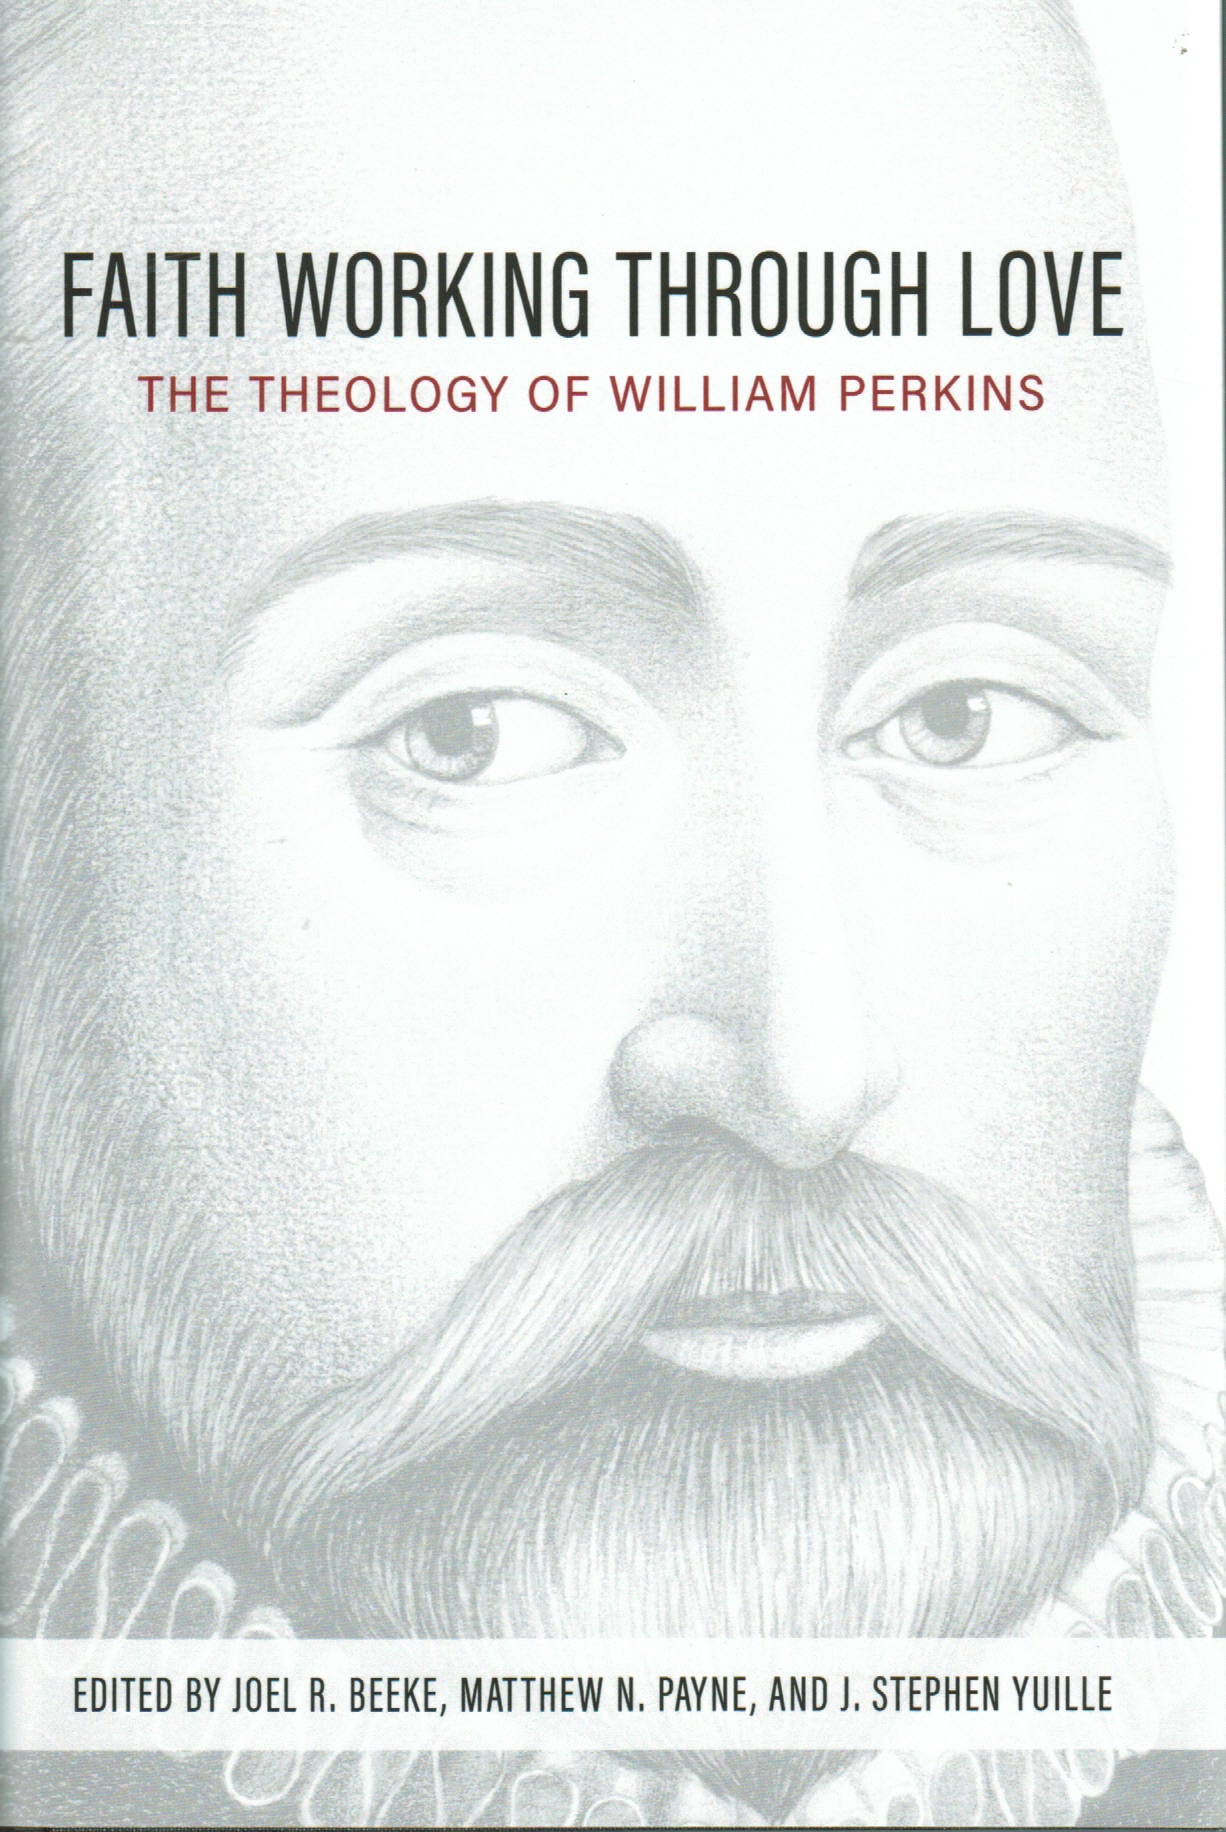 William　Book　Theology　The　Working　Reformed　Services　Perkins　–　Love:　through　Faith　of